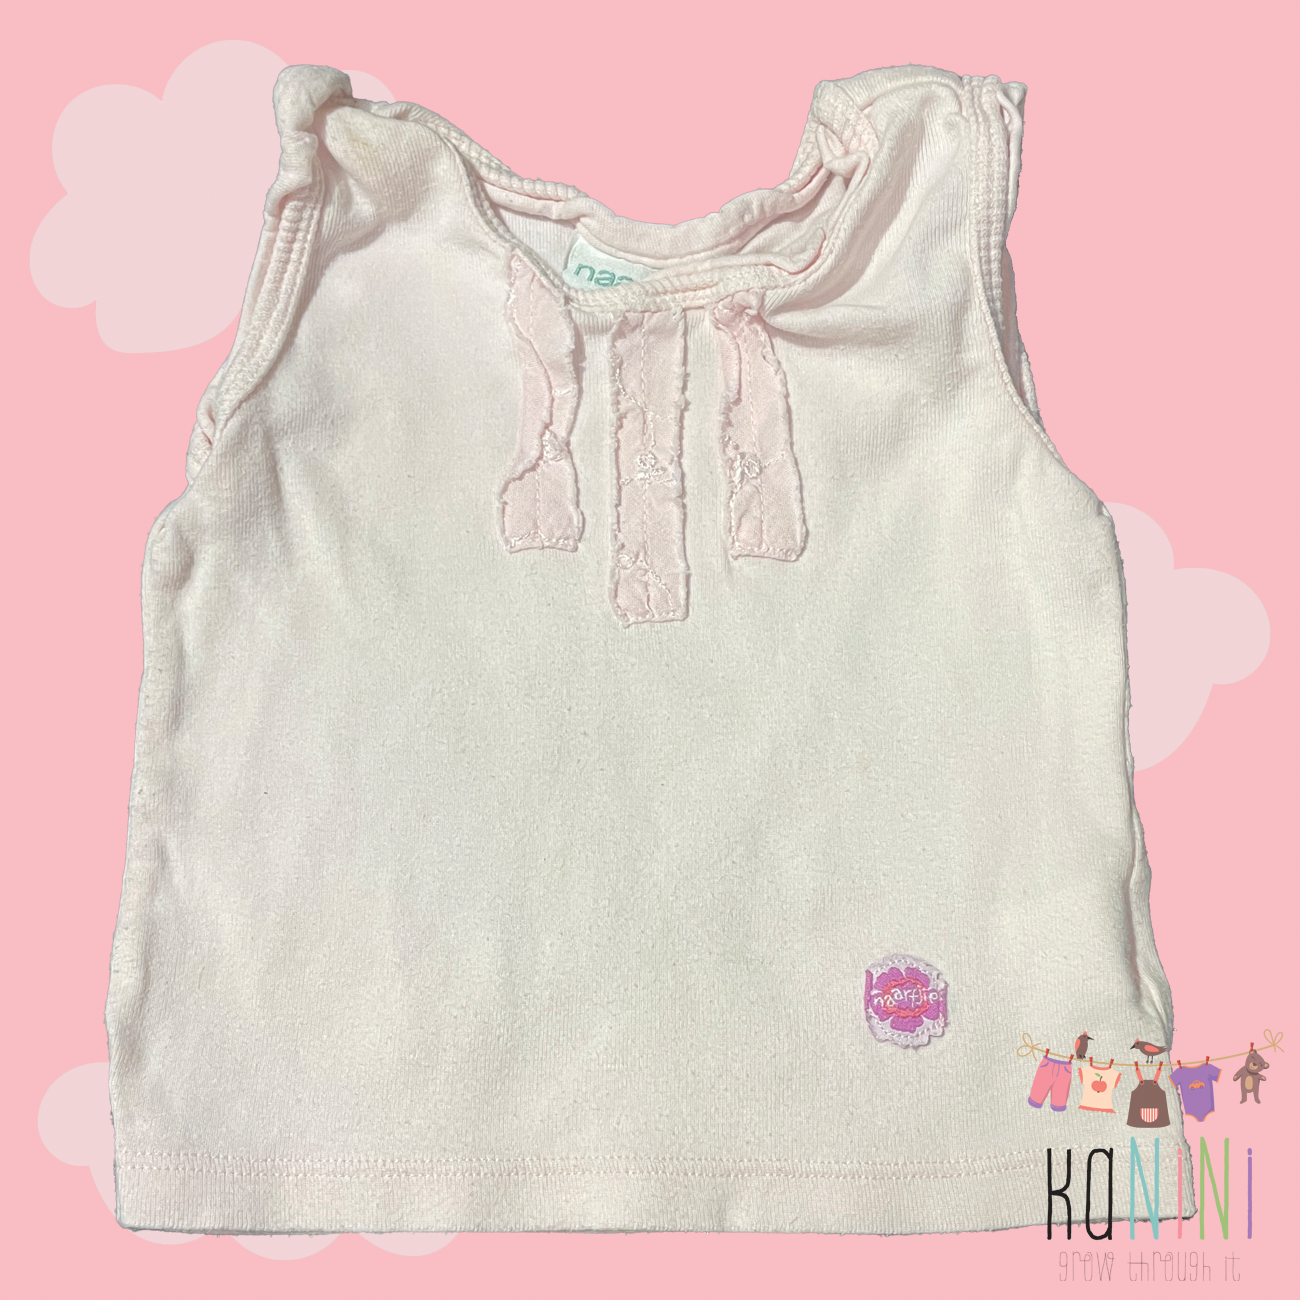 Featured image for “Naartjie 6 - 12 Months Girls Pink Sleeveless Top”